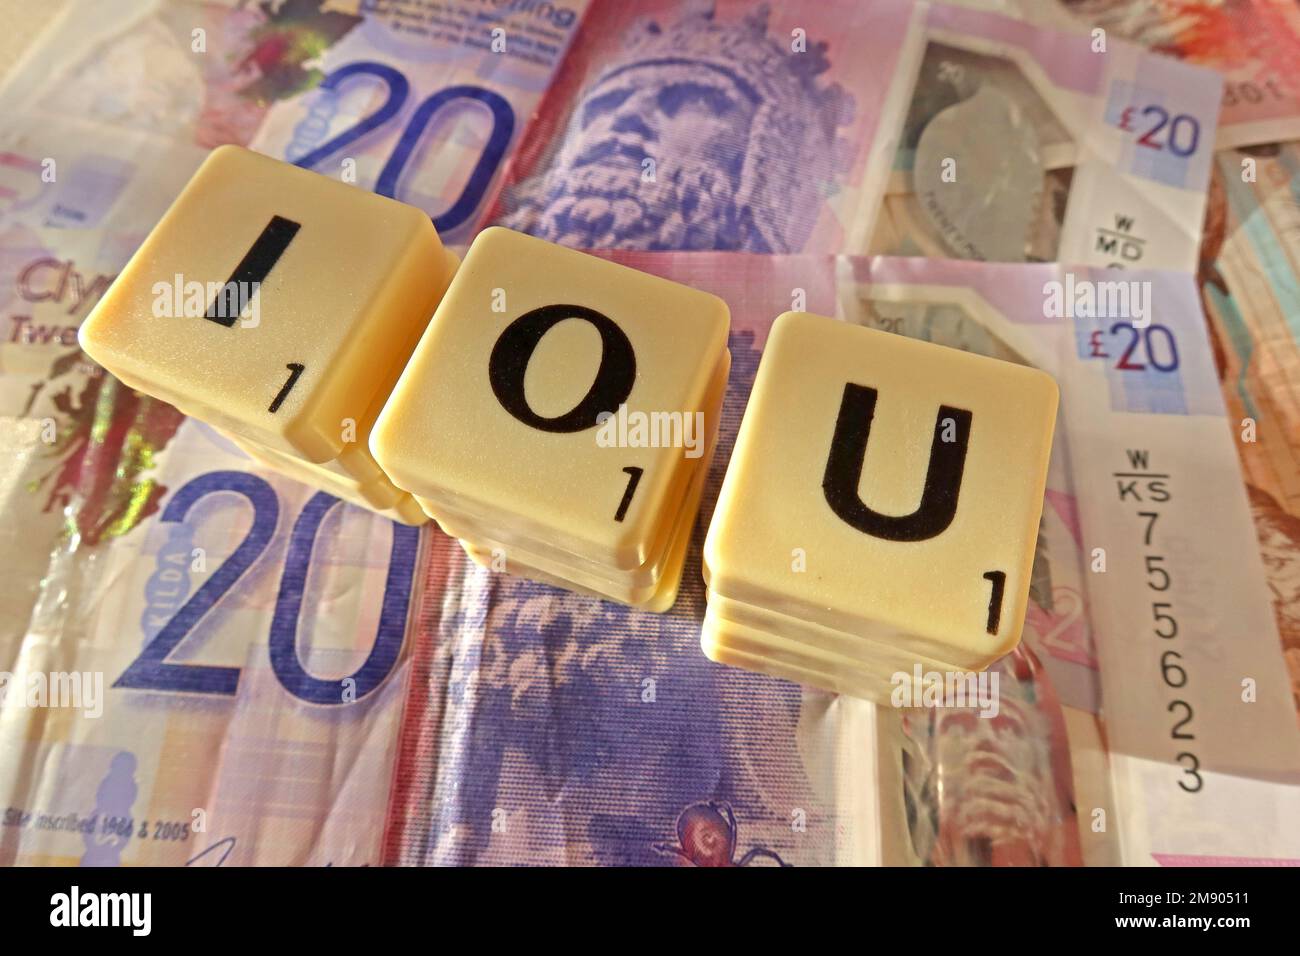 IOU, I Owe You, letters on a number of Scottish Sterling notes, borrowing and lending from friends or colleagues Stock Photo